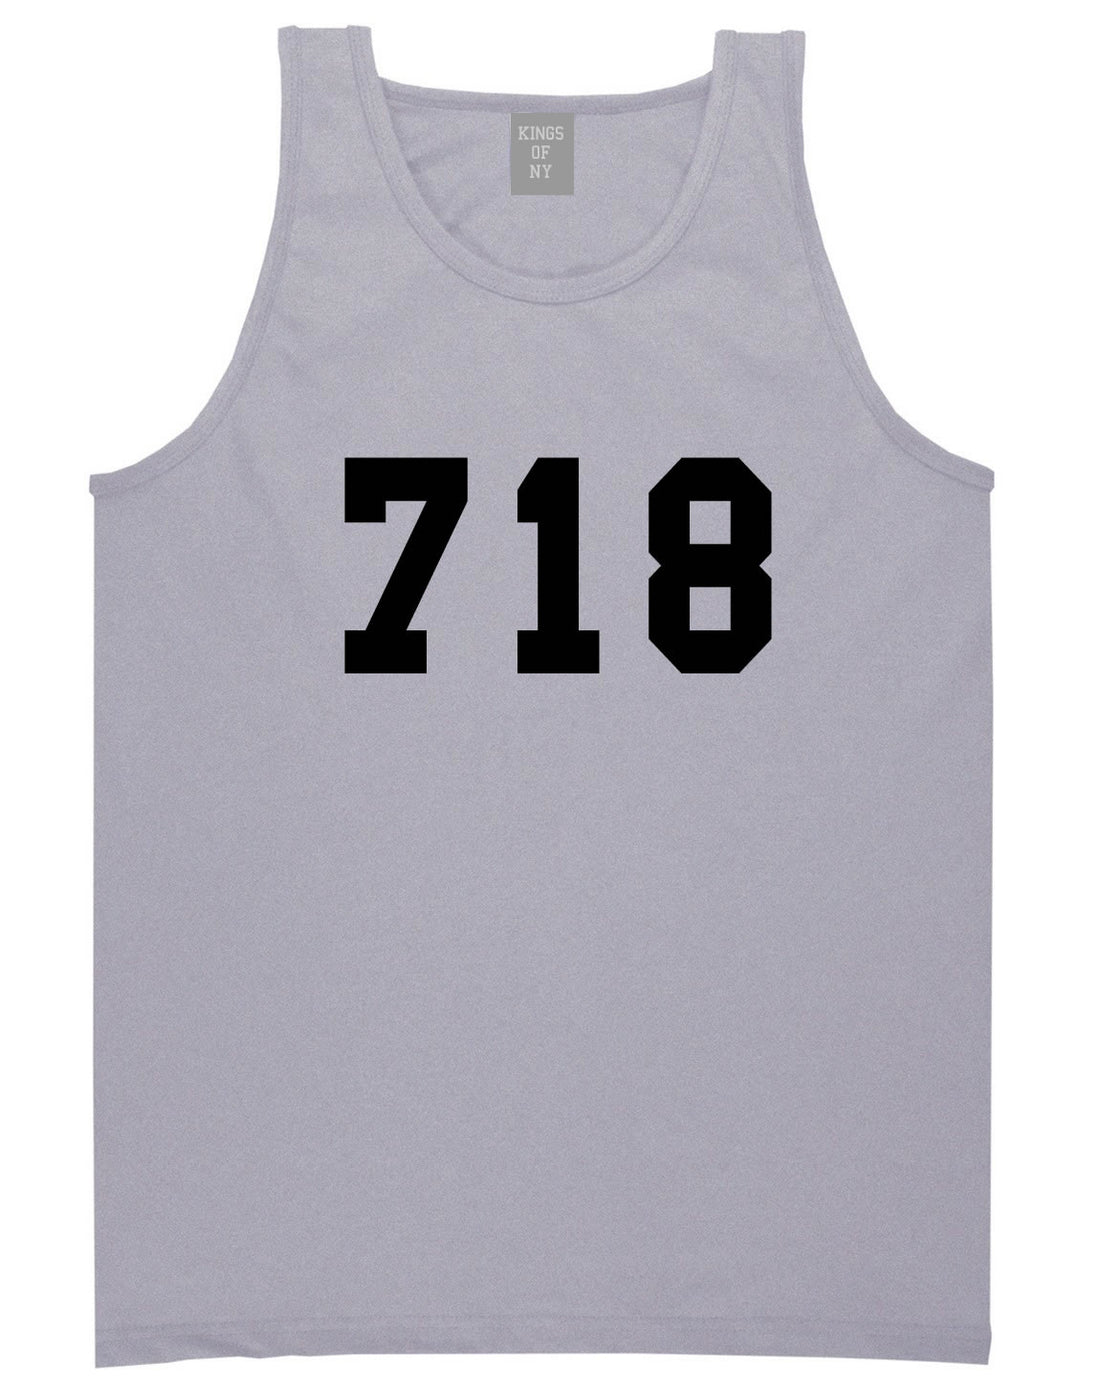 718 New York Area Code Tank Top in Grey By Kings Of NY